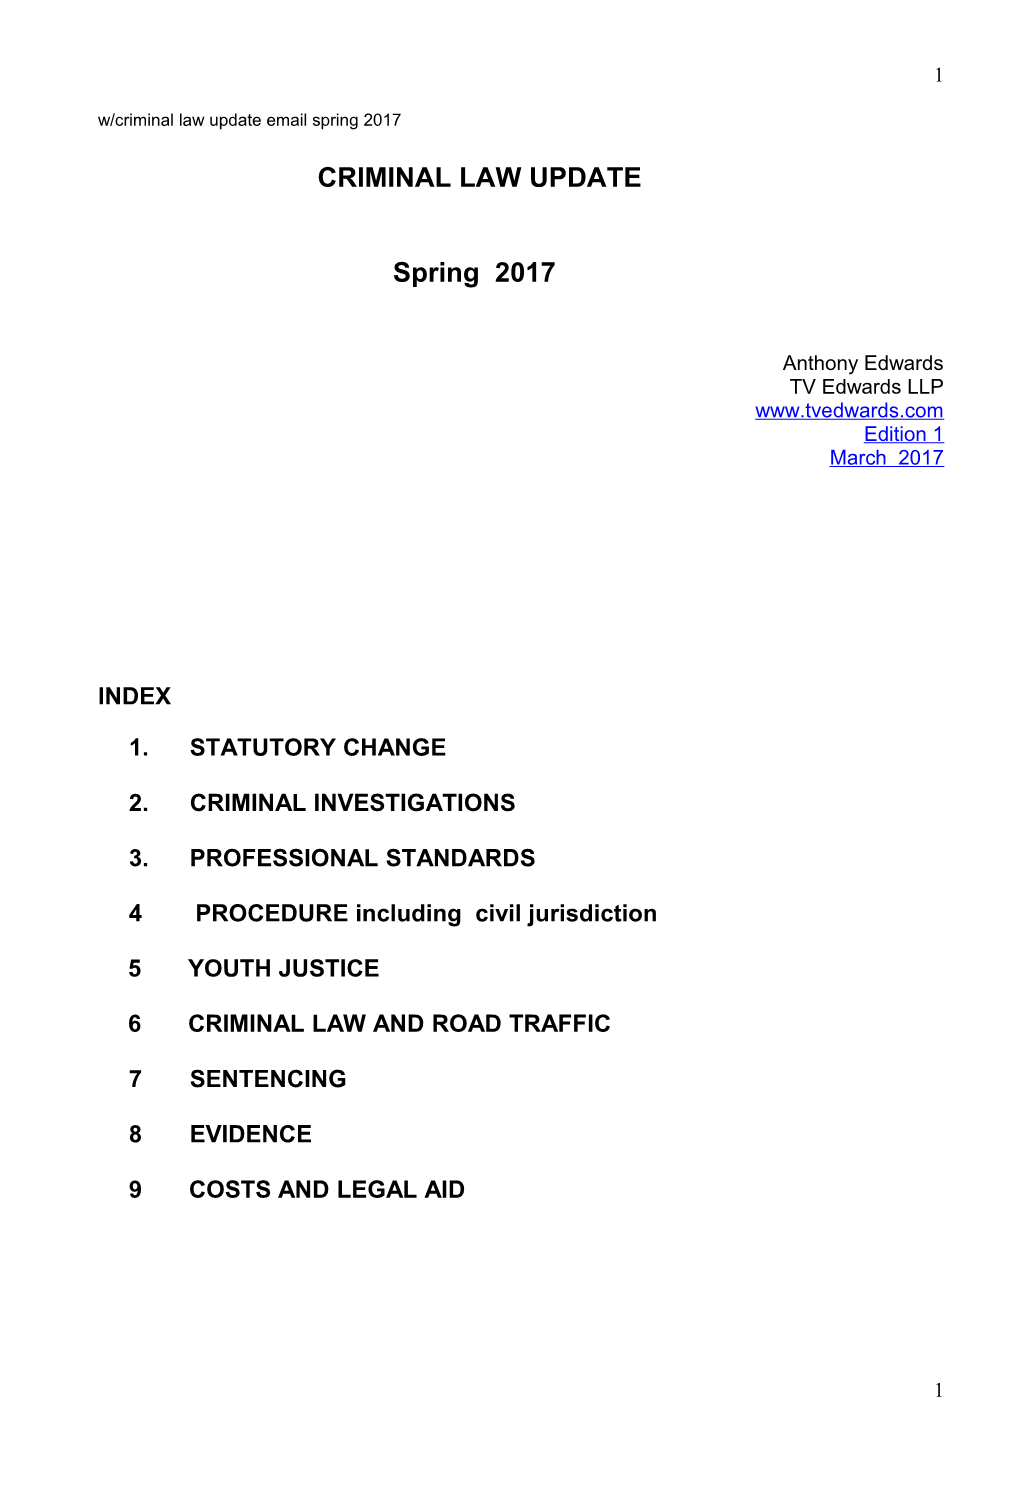 W/Criminal Law Update Email Spring 2017